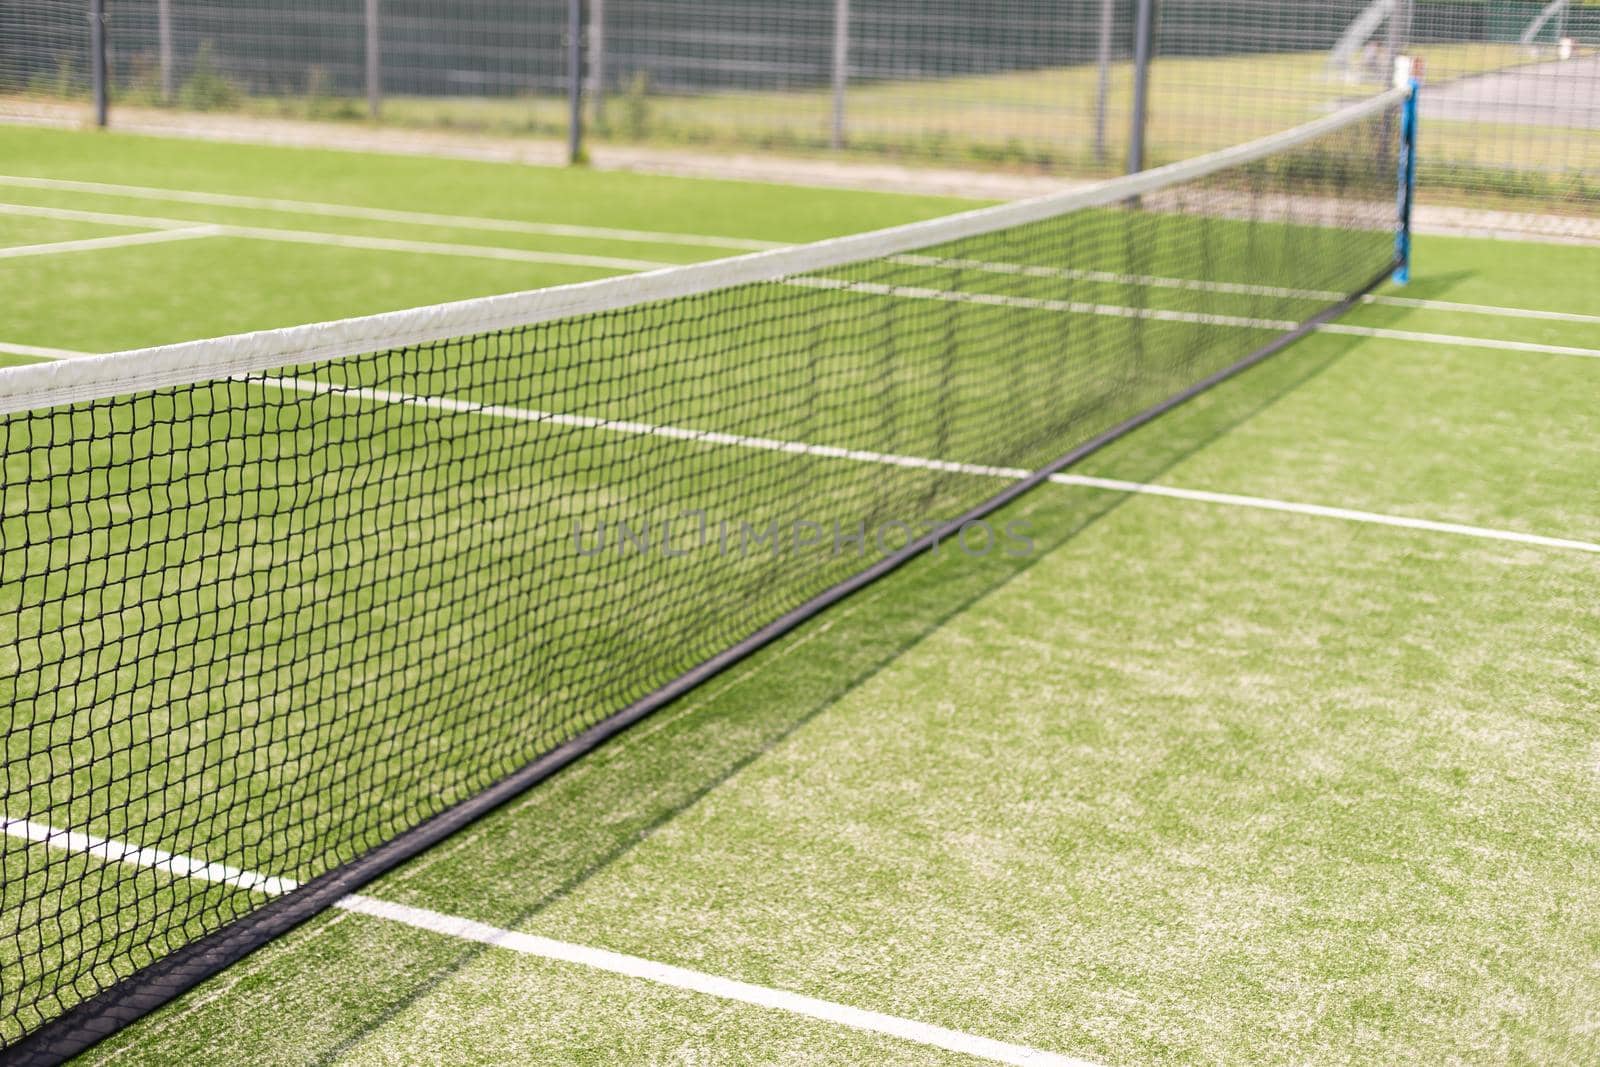 Tennis net and court. Playing Tennis. Healthy lifestyle